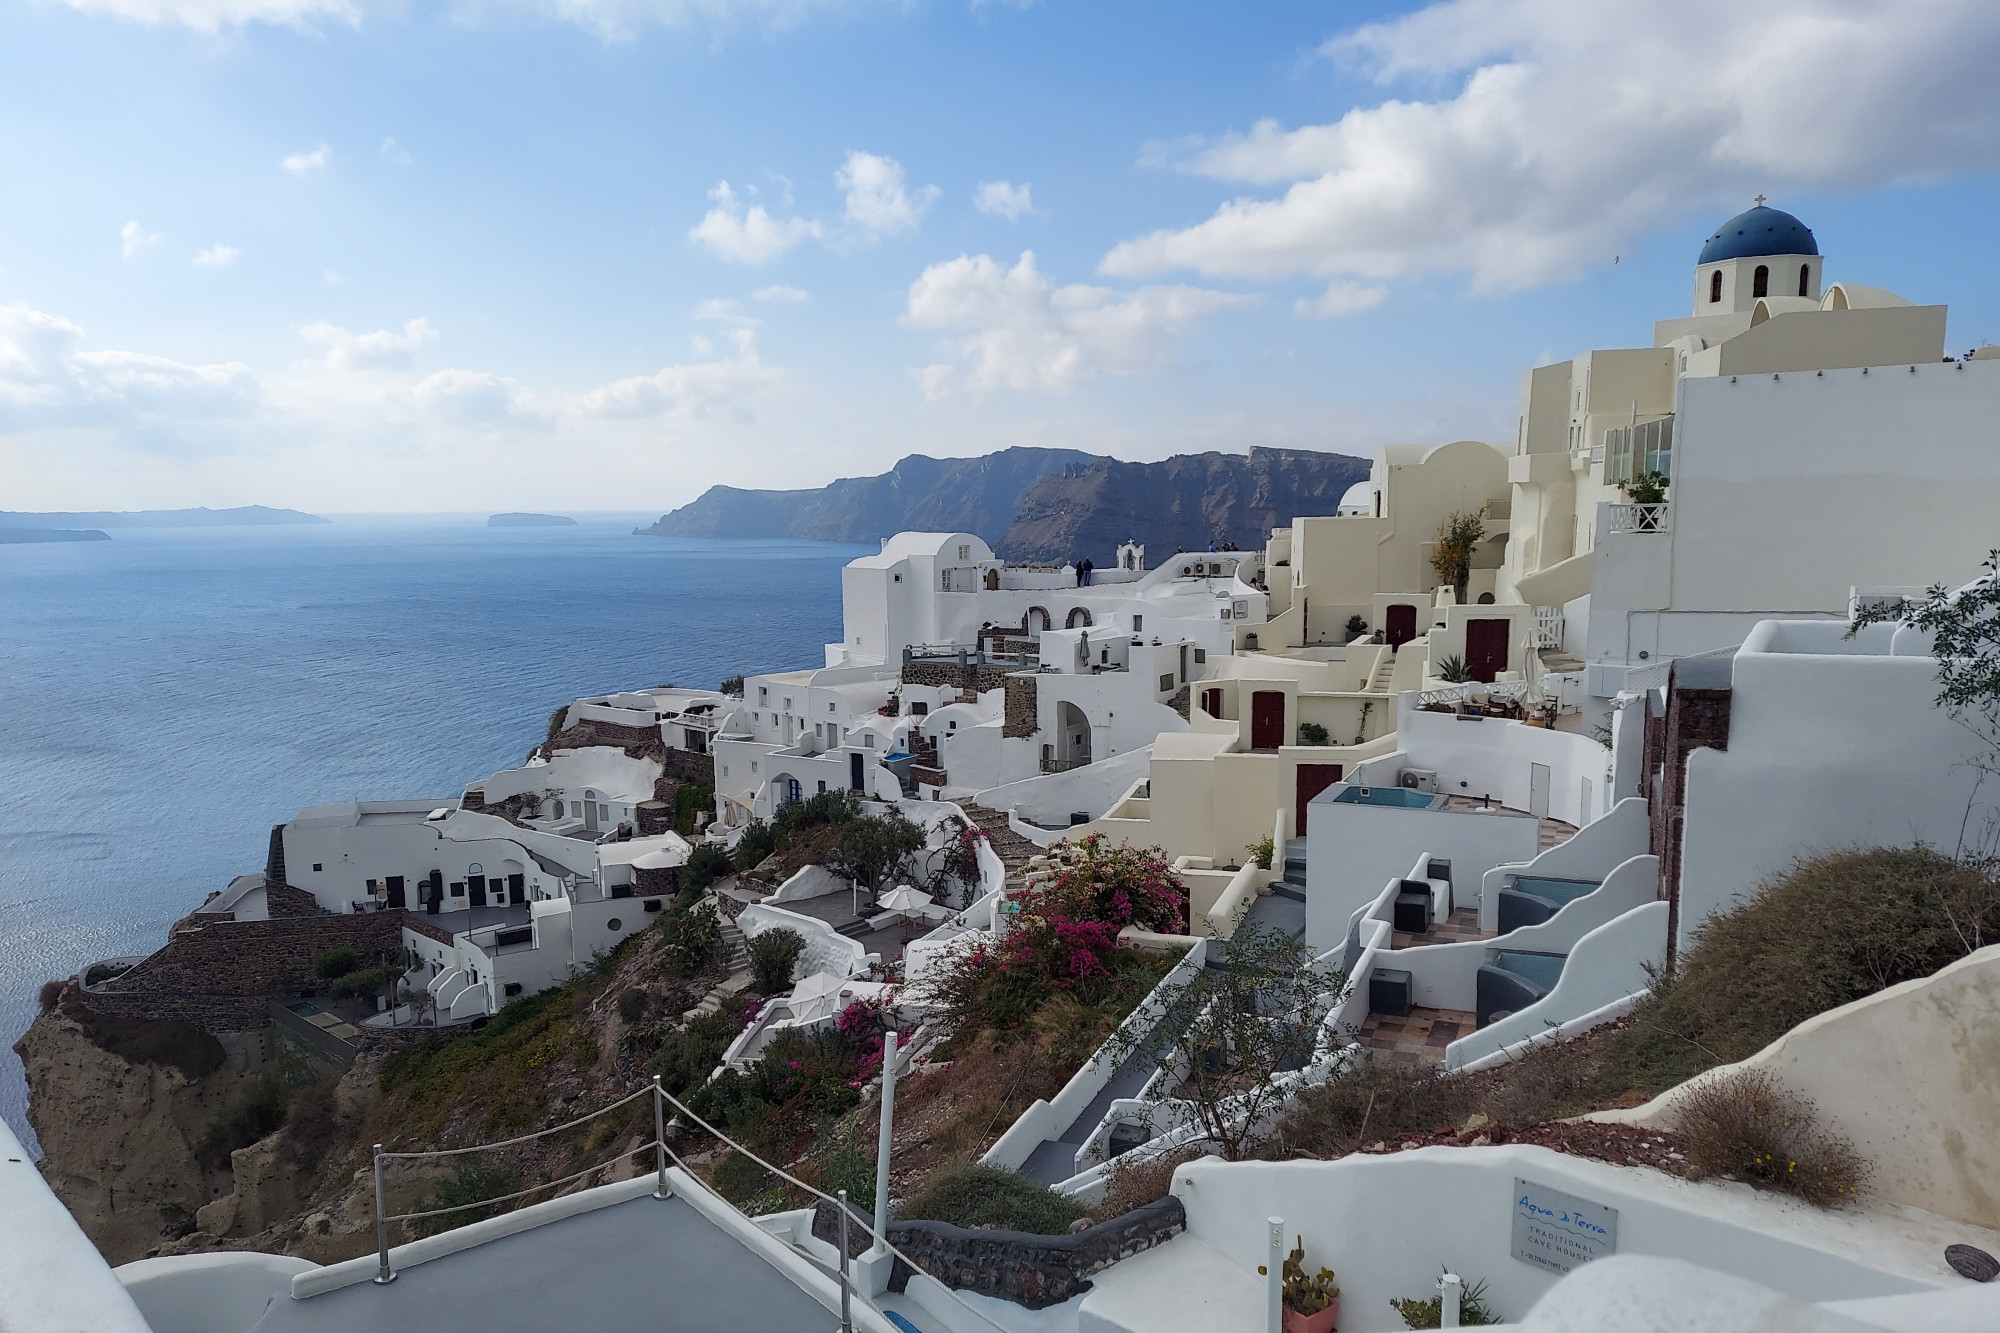 Dramatic white church and cliff-side dwellings on the island of Santorini — one of the Cyclades Islands in the Aegean Sea, Greece.